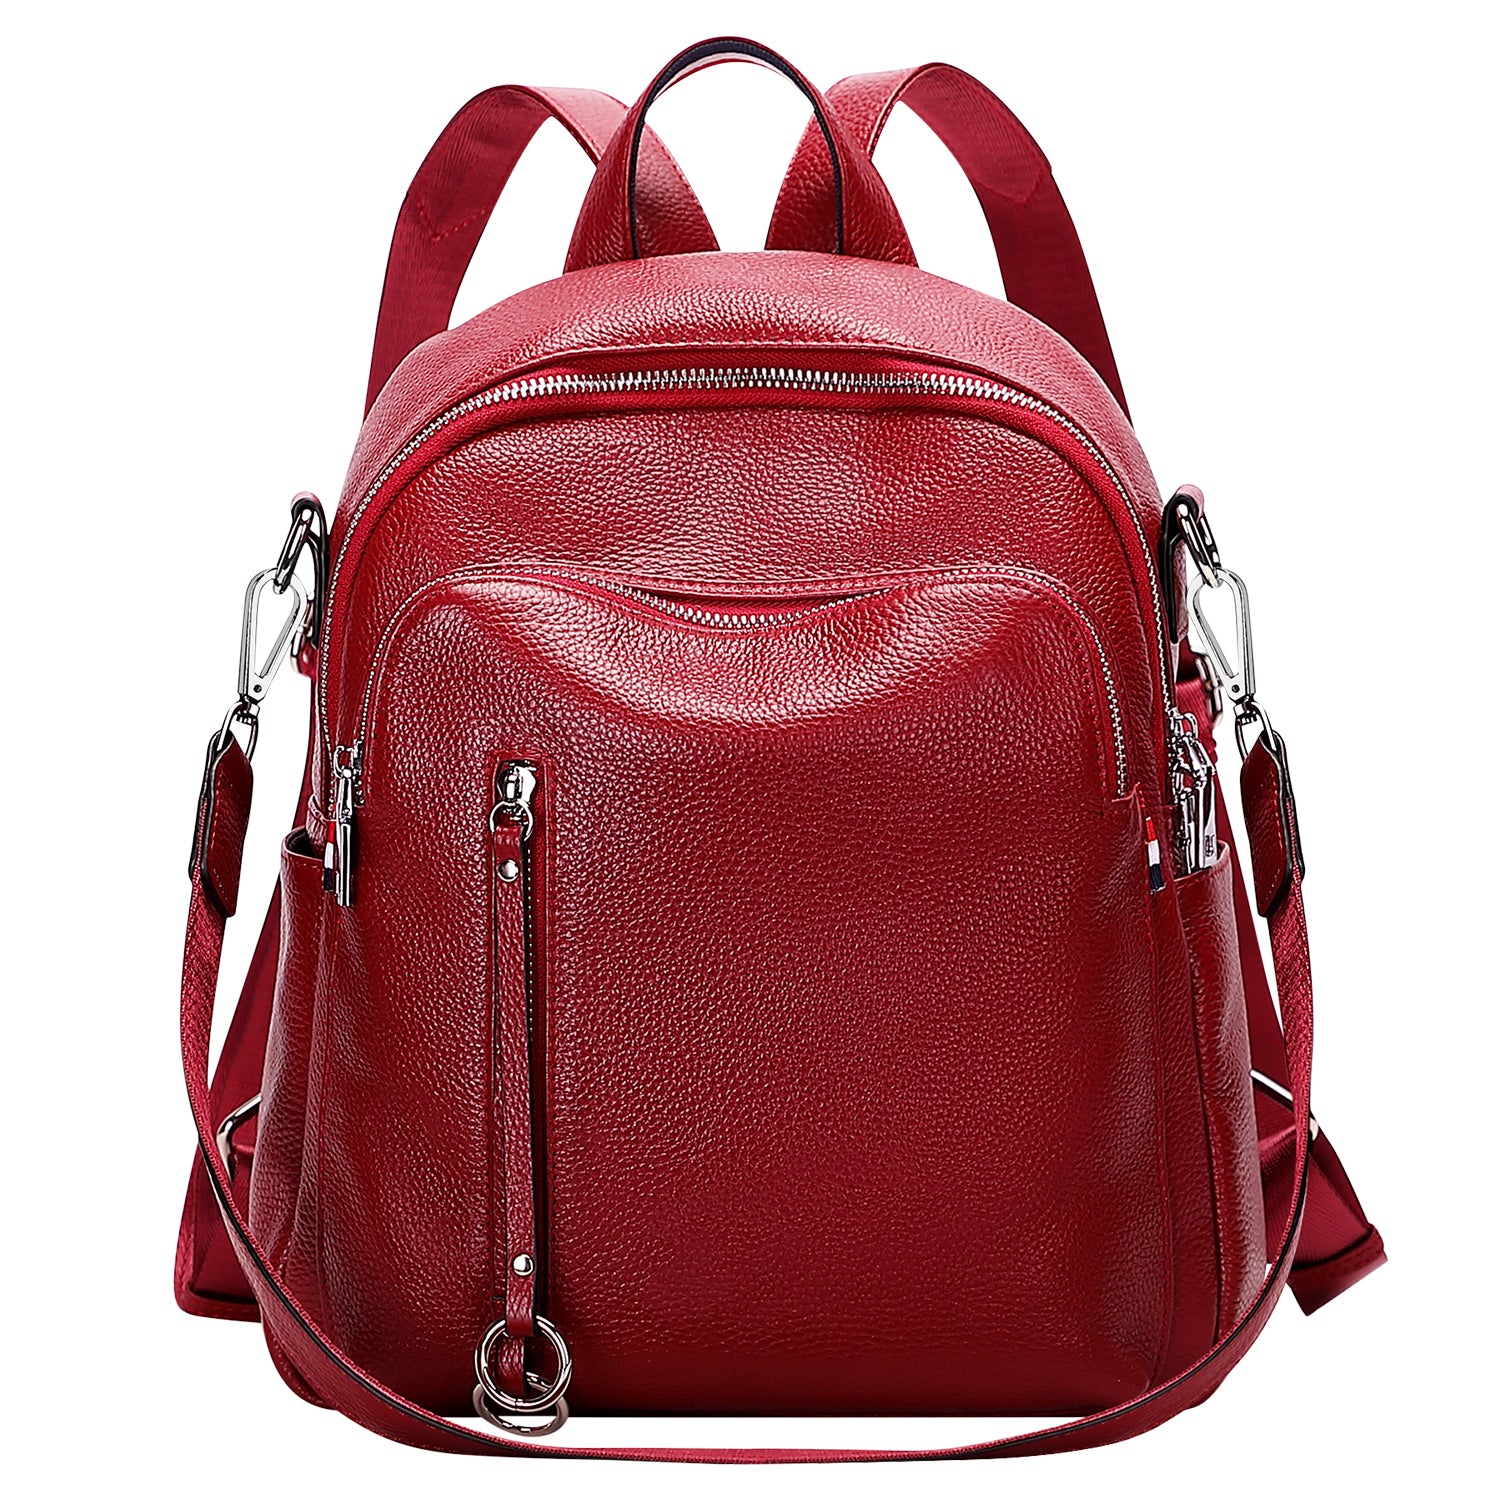 ALYSSA Backpack Red Synthetic Leather Bag Purse | eBay